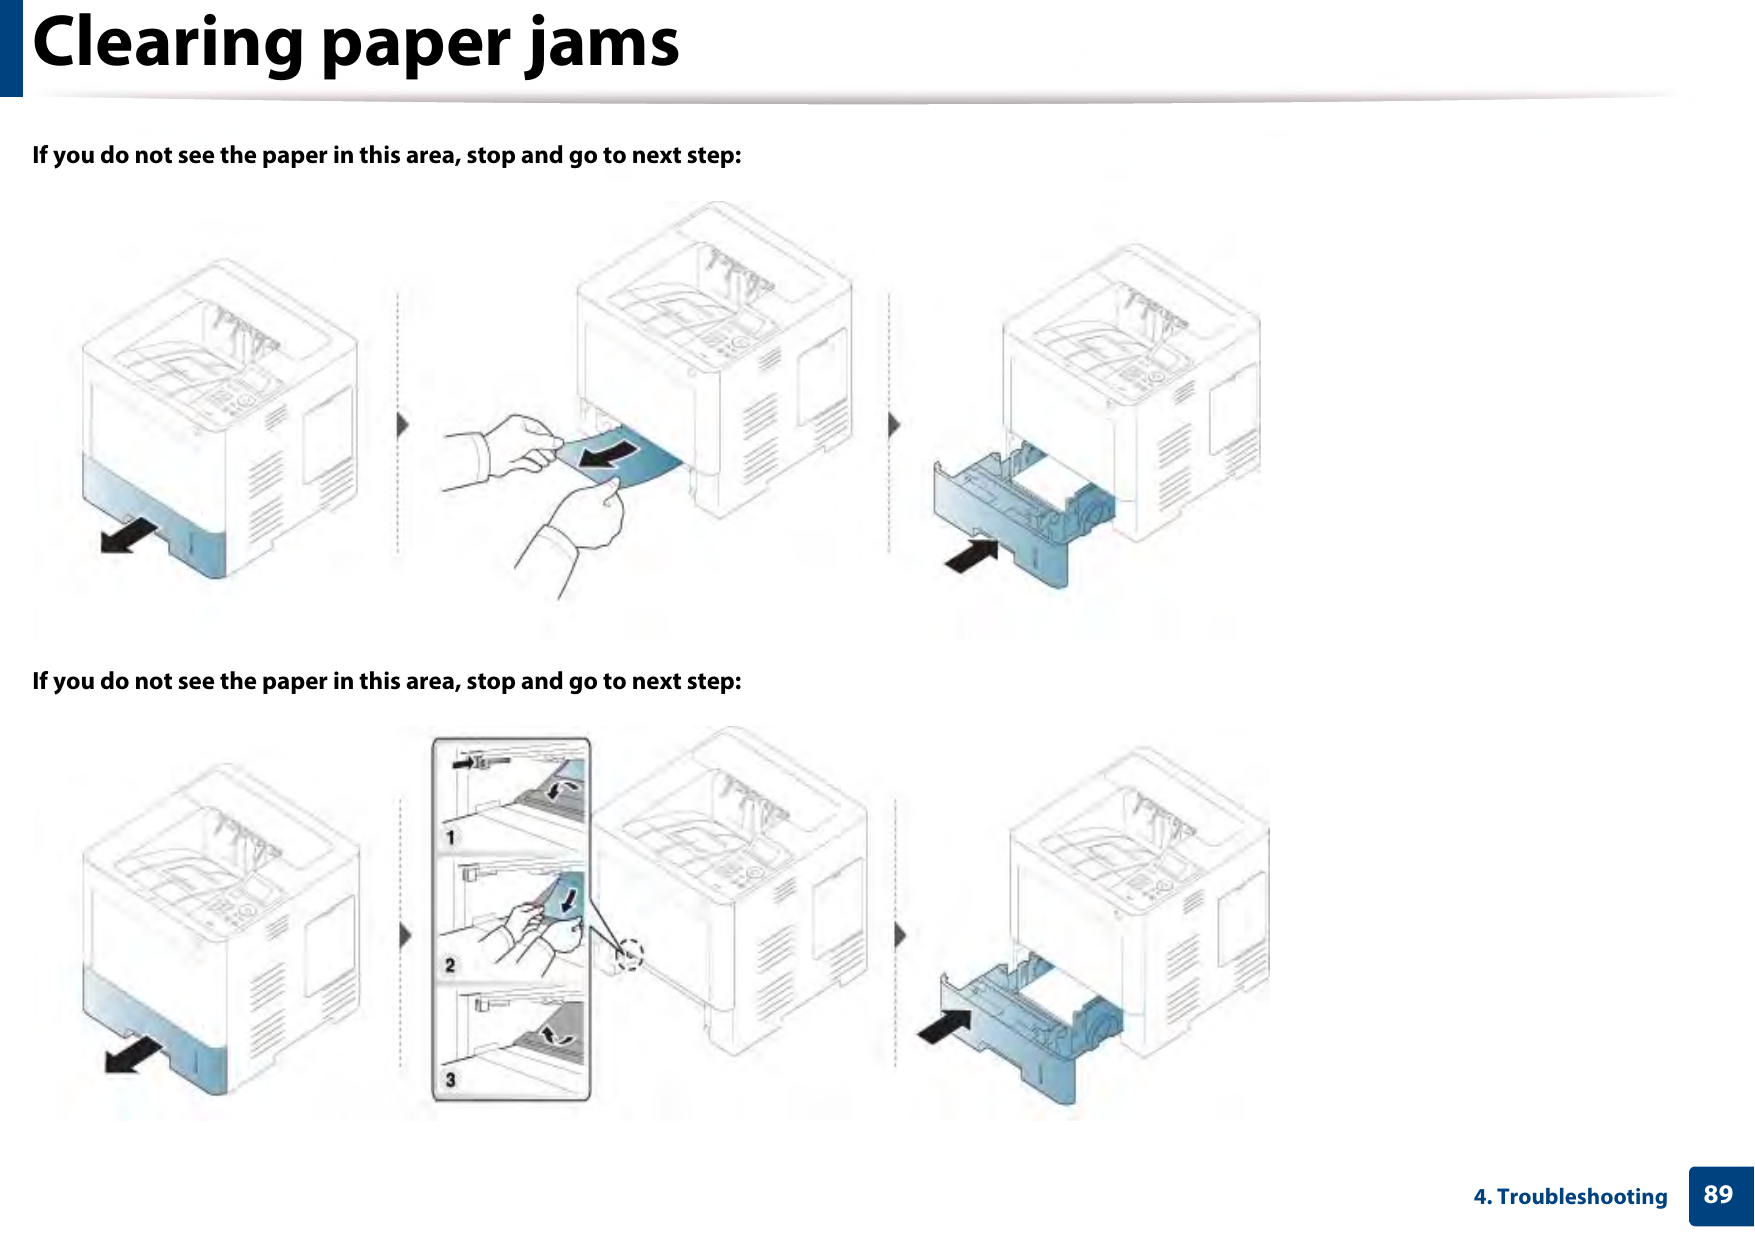 Clearing paper jams894. TroubleshootingIf you do not see the paper in this area, stop and go to next step:If you do not see the paper in this area, stop and go to next step: